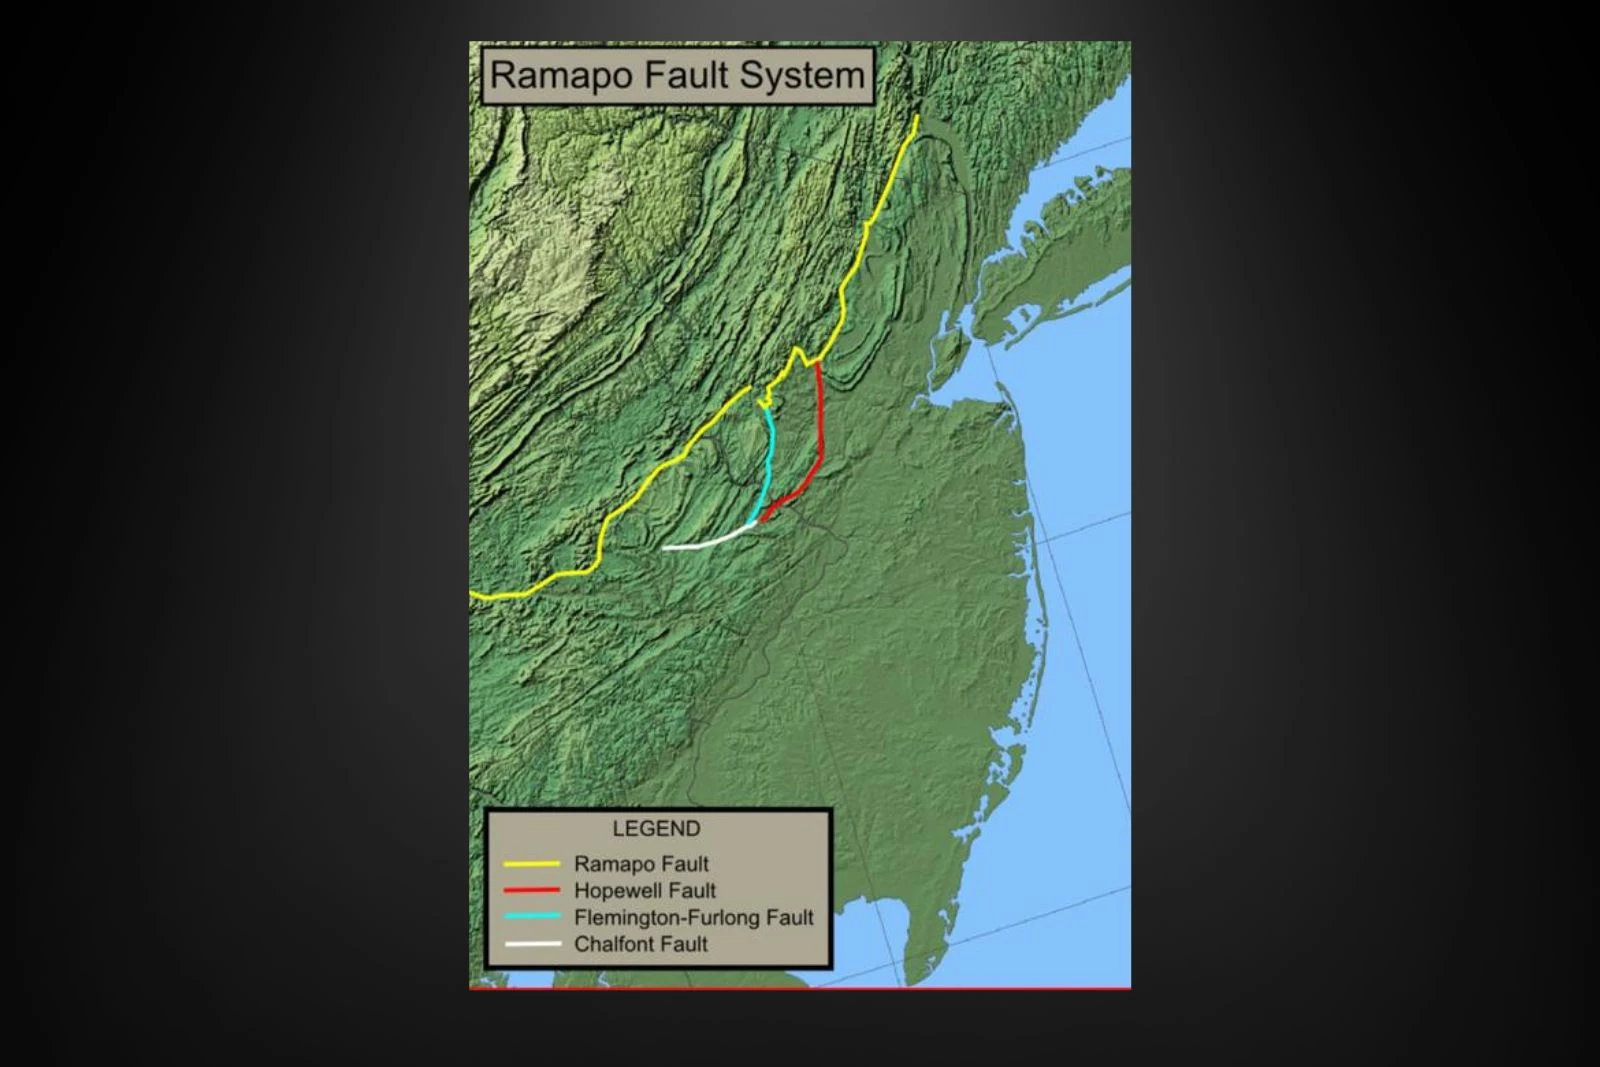 The Ramapo Fault System